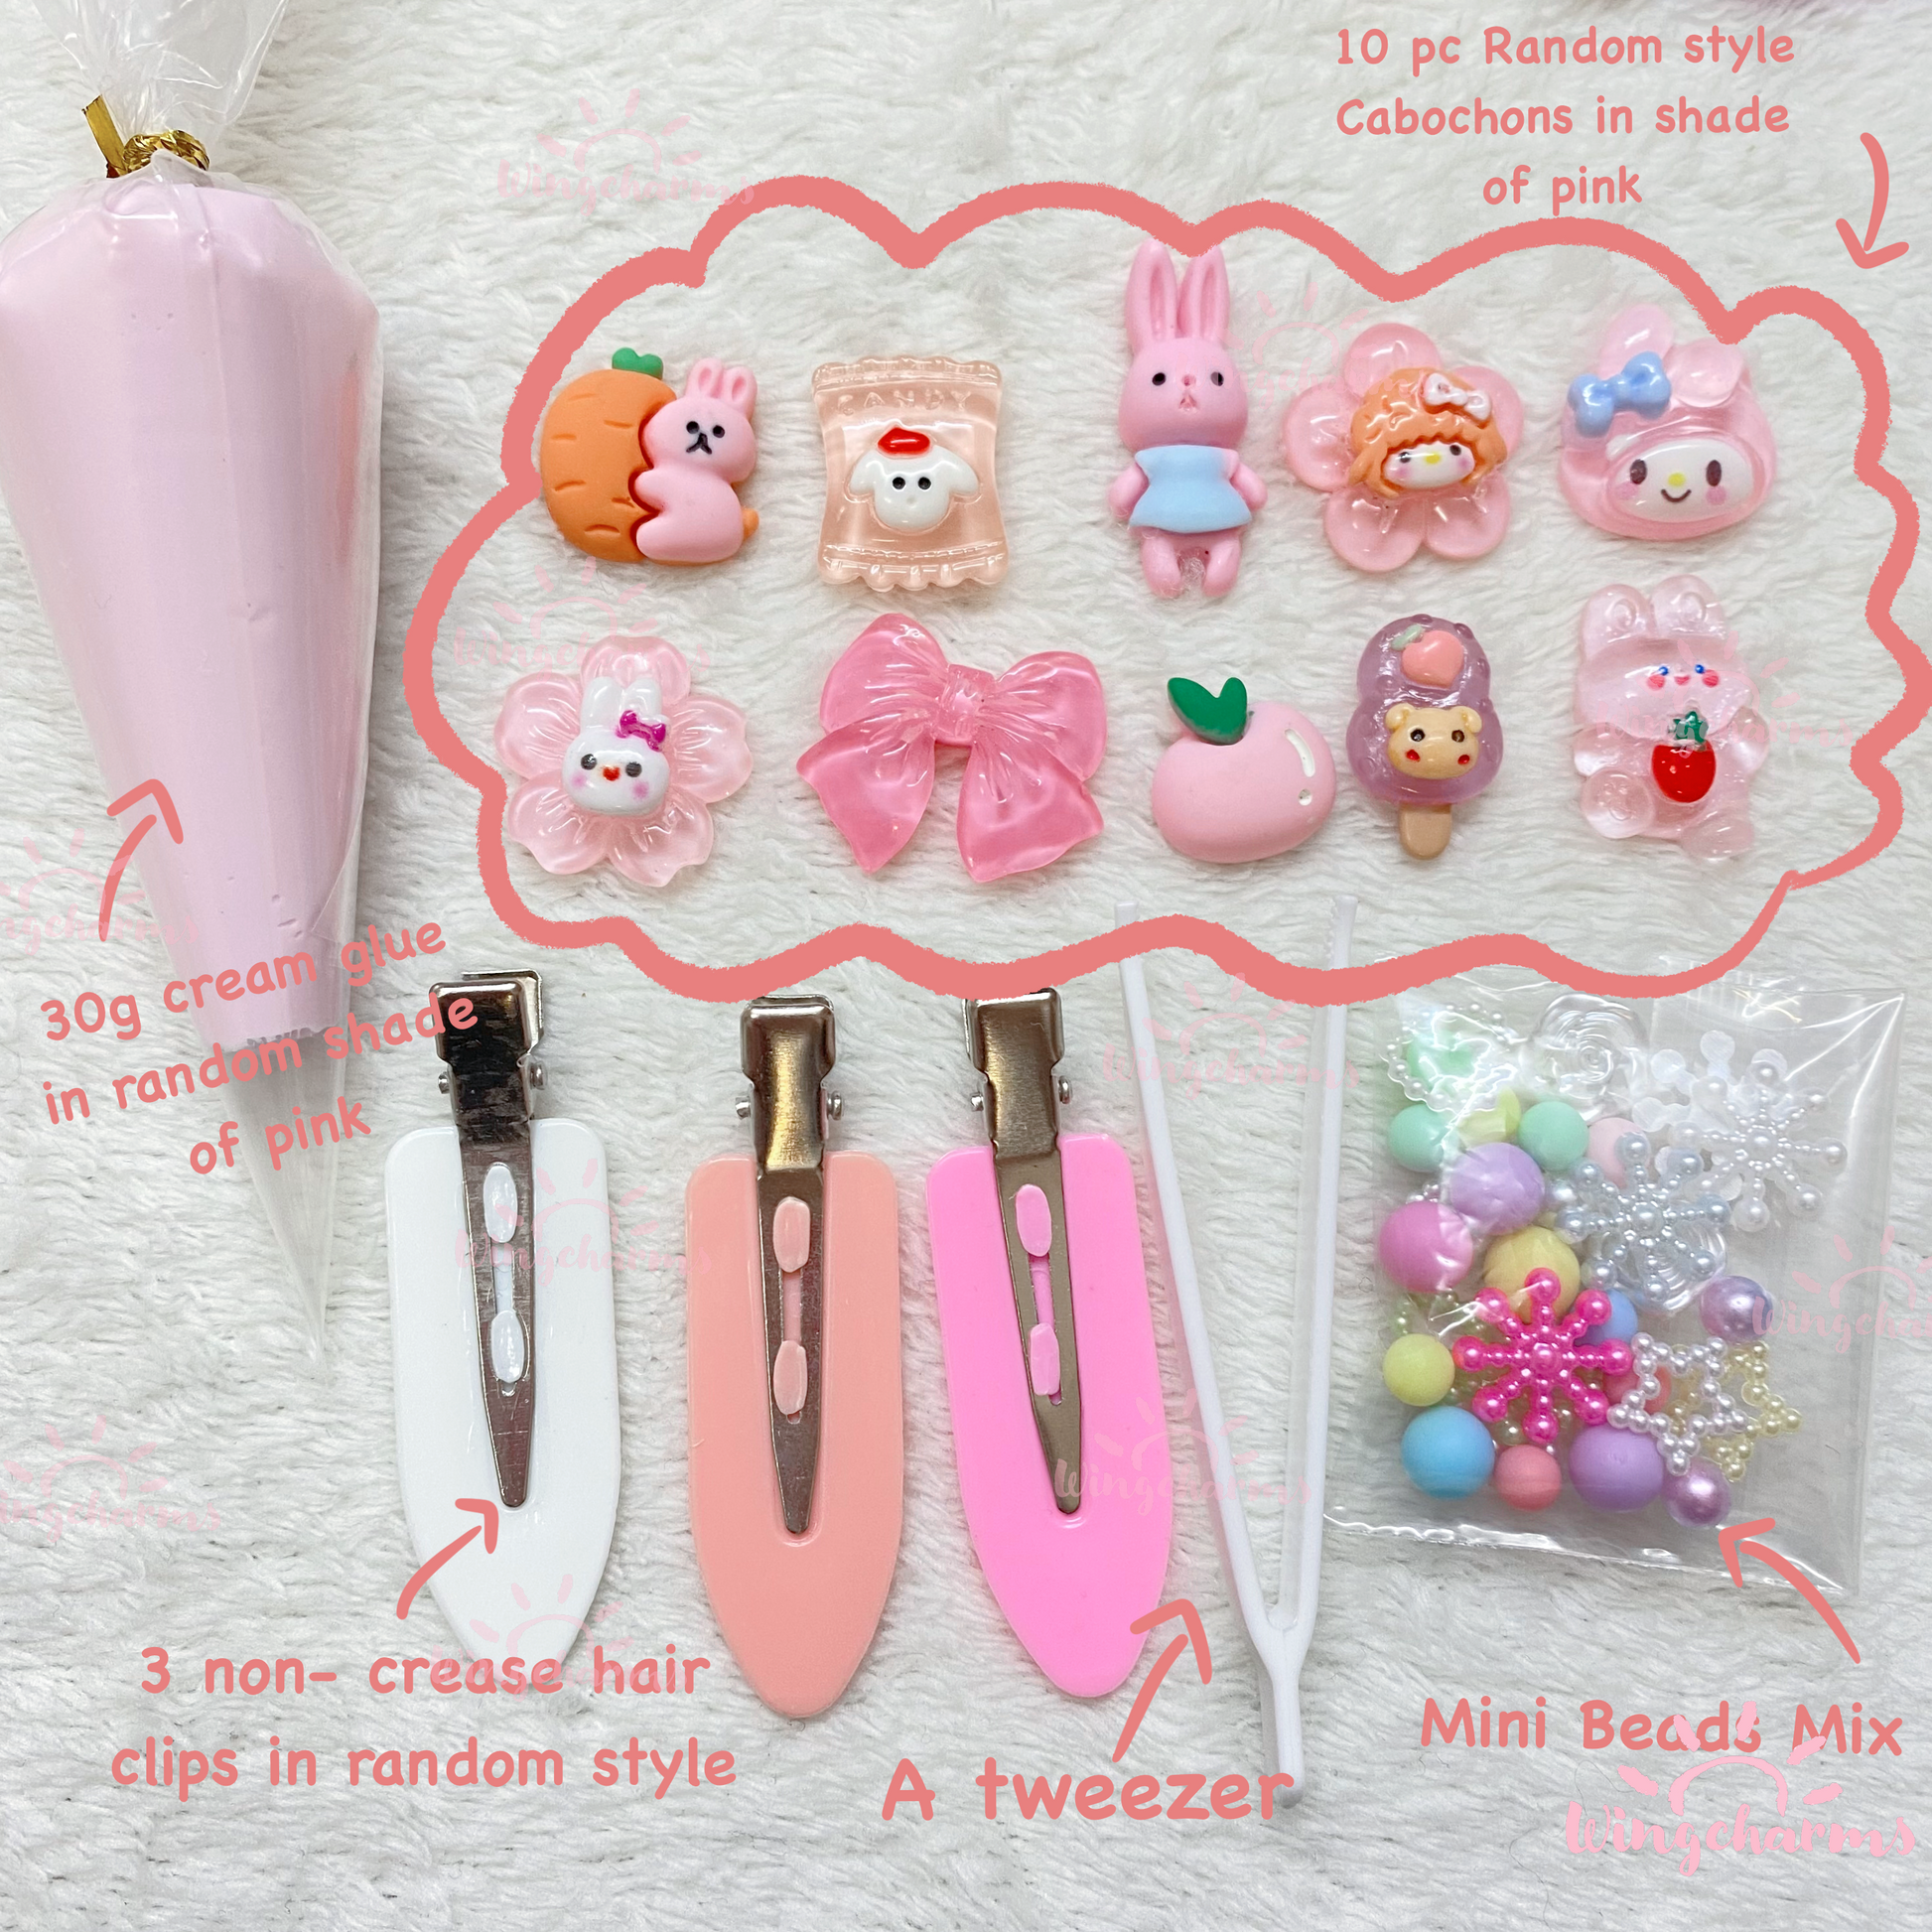 Decoden Sets – Wingcharms